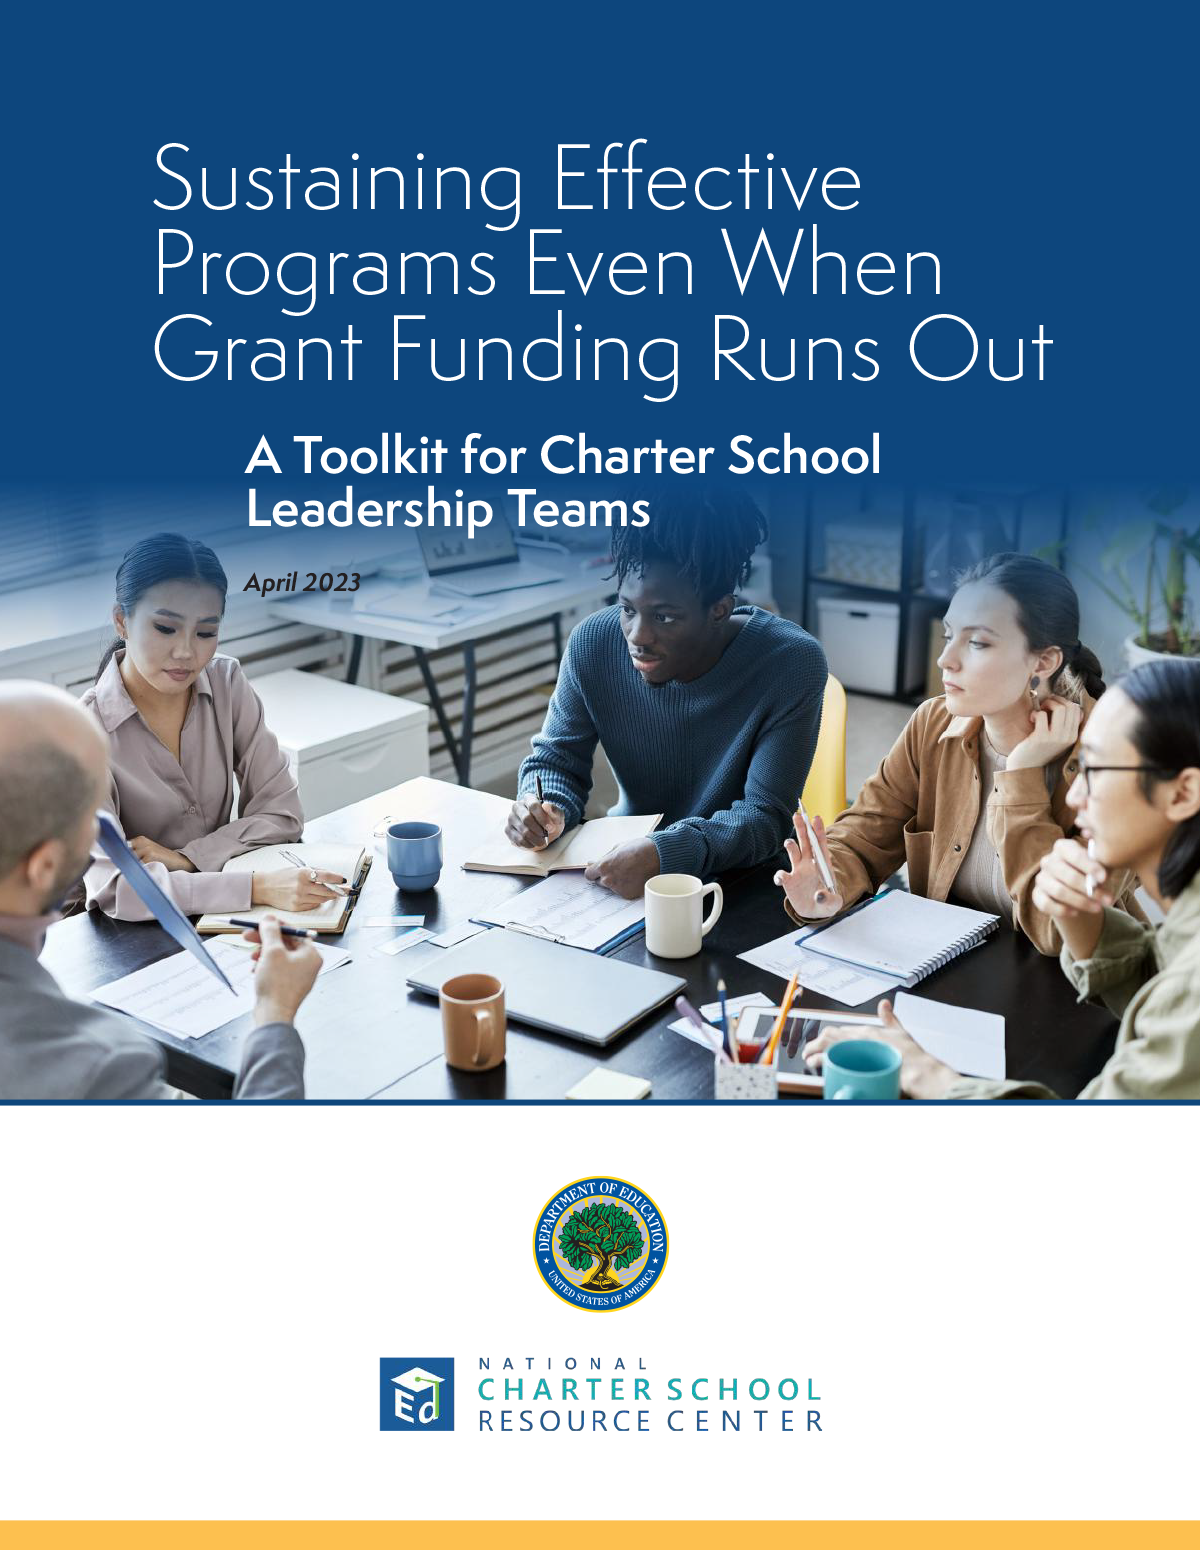 Sustaining Effective Programs Even When Grant Funding Runs Out: A Toolkit for Charter School Leadership Teams